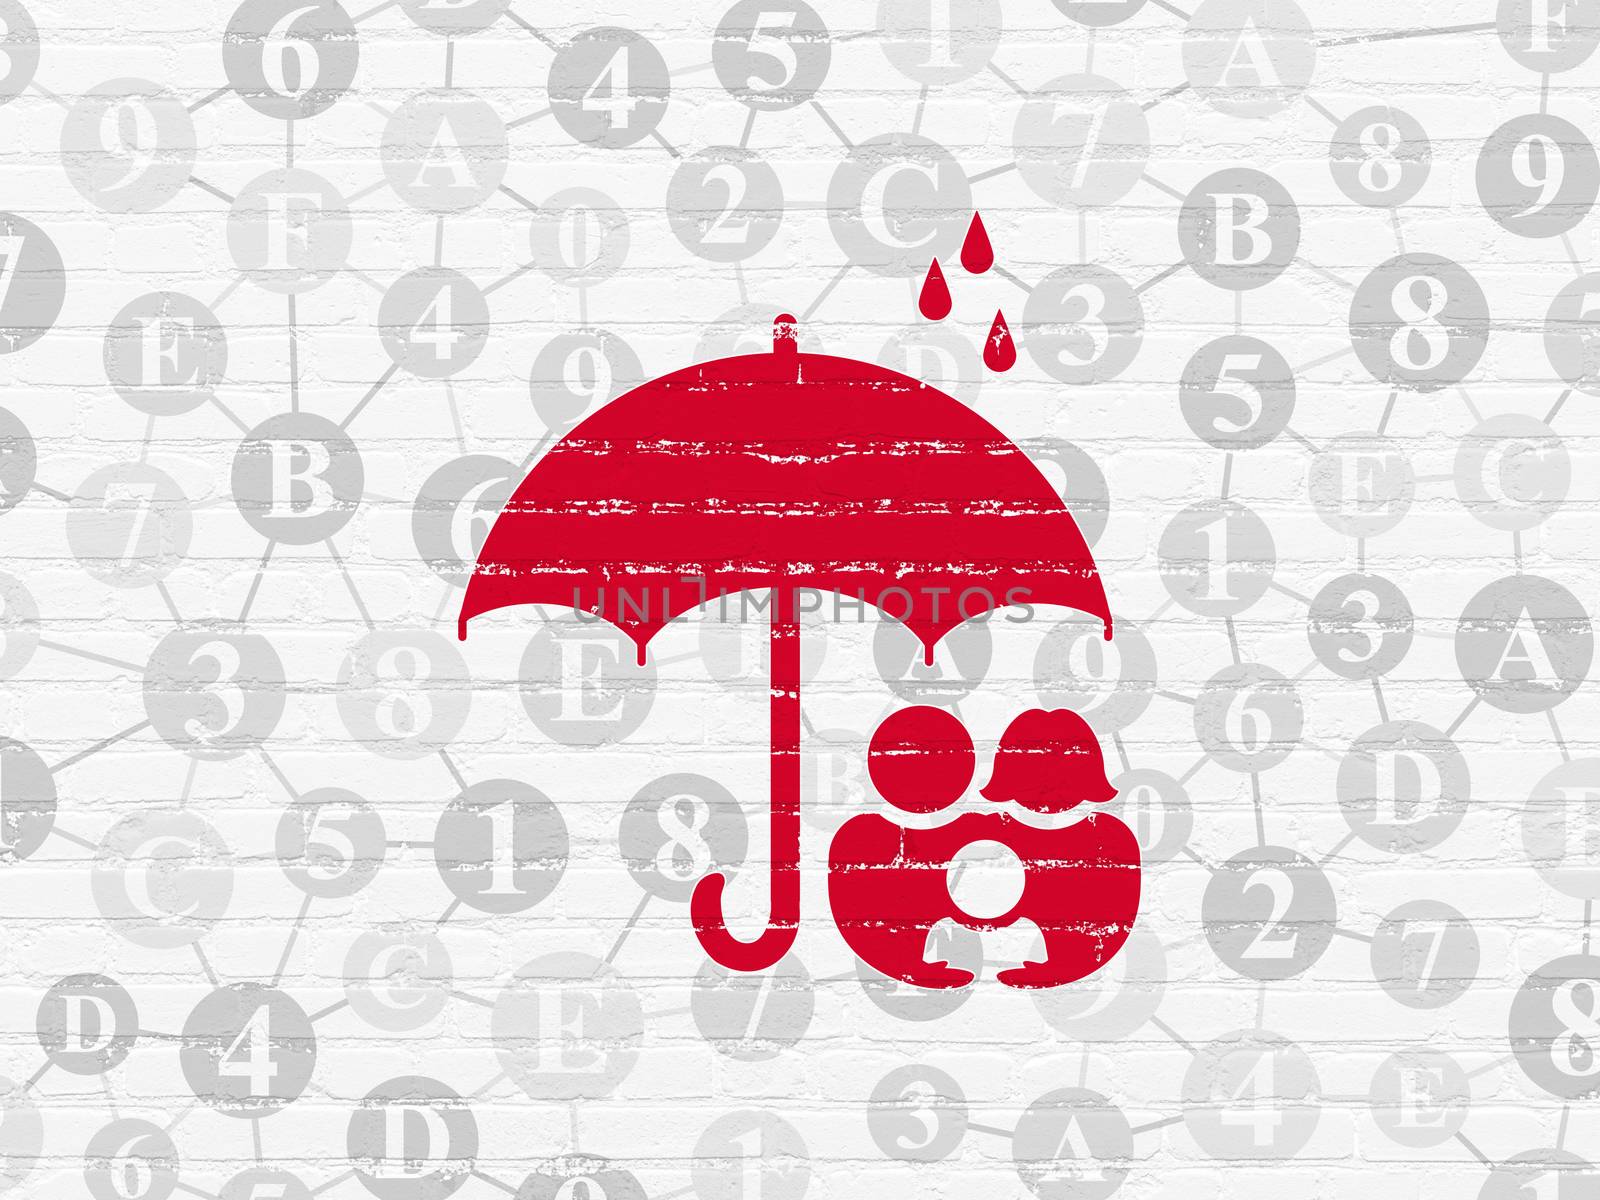 Protection concept: Painted red Family And Umbrella icon on White Brick wall background with Scheme Of Hexadecimal Code